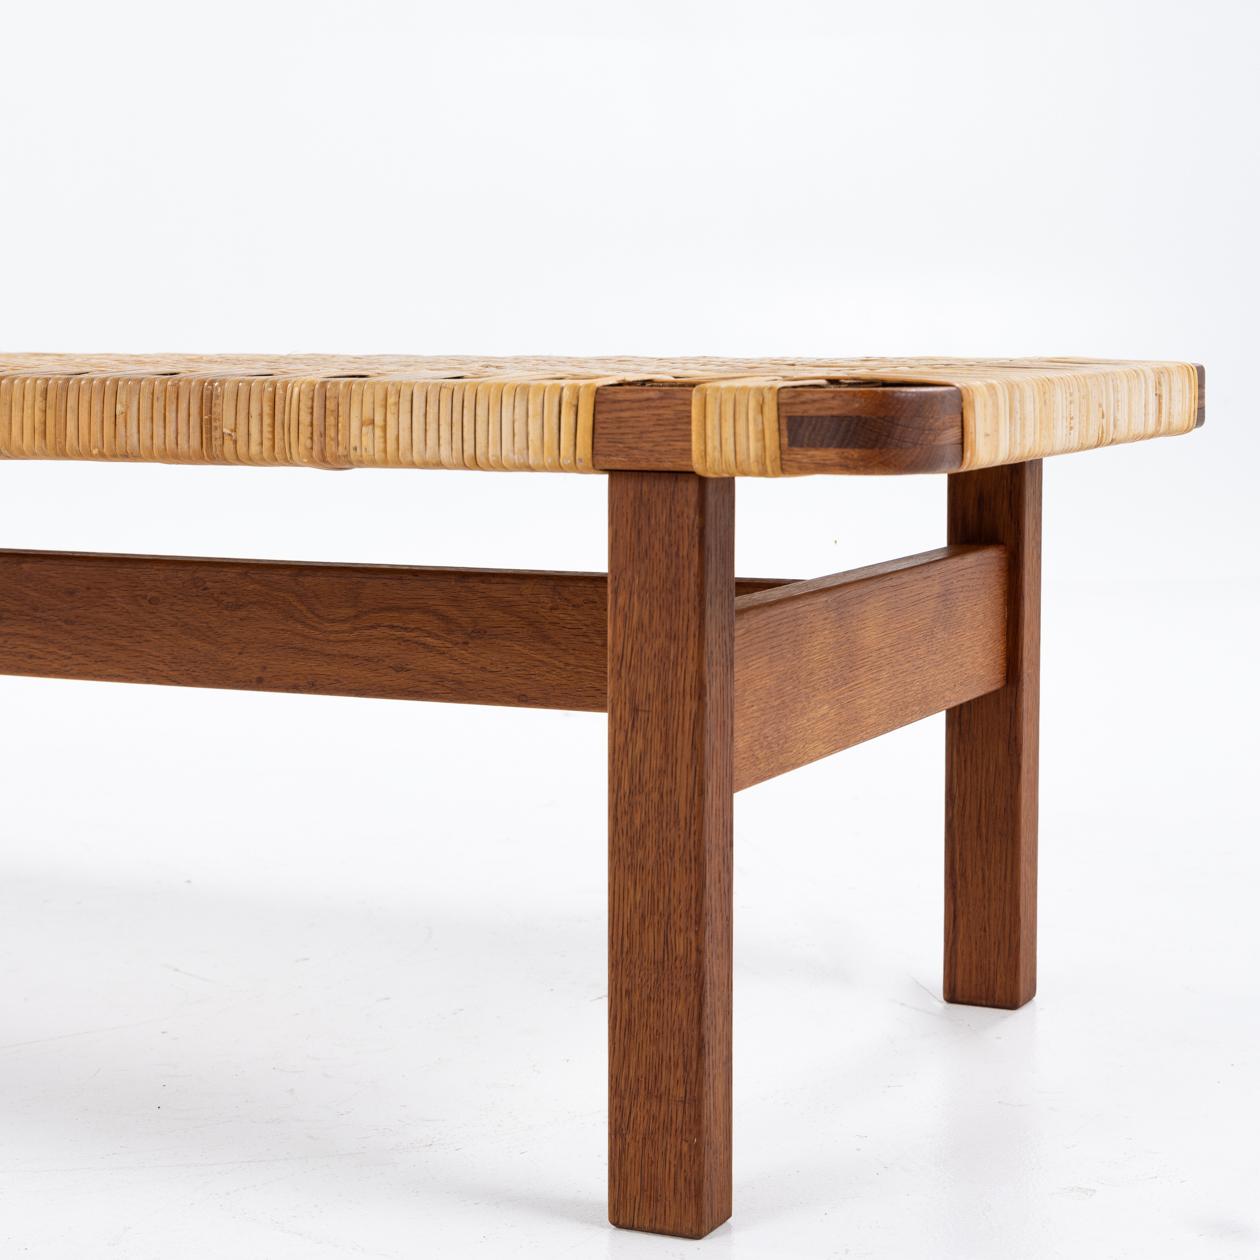 Bench / coffee table in patinated oak and cane. Designed 1950 and produced in 1972. Børge Mogensen / Fredericia Furniture.